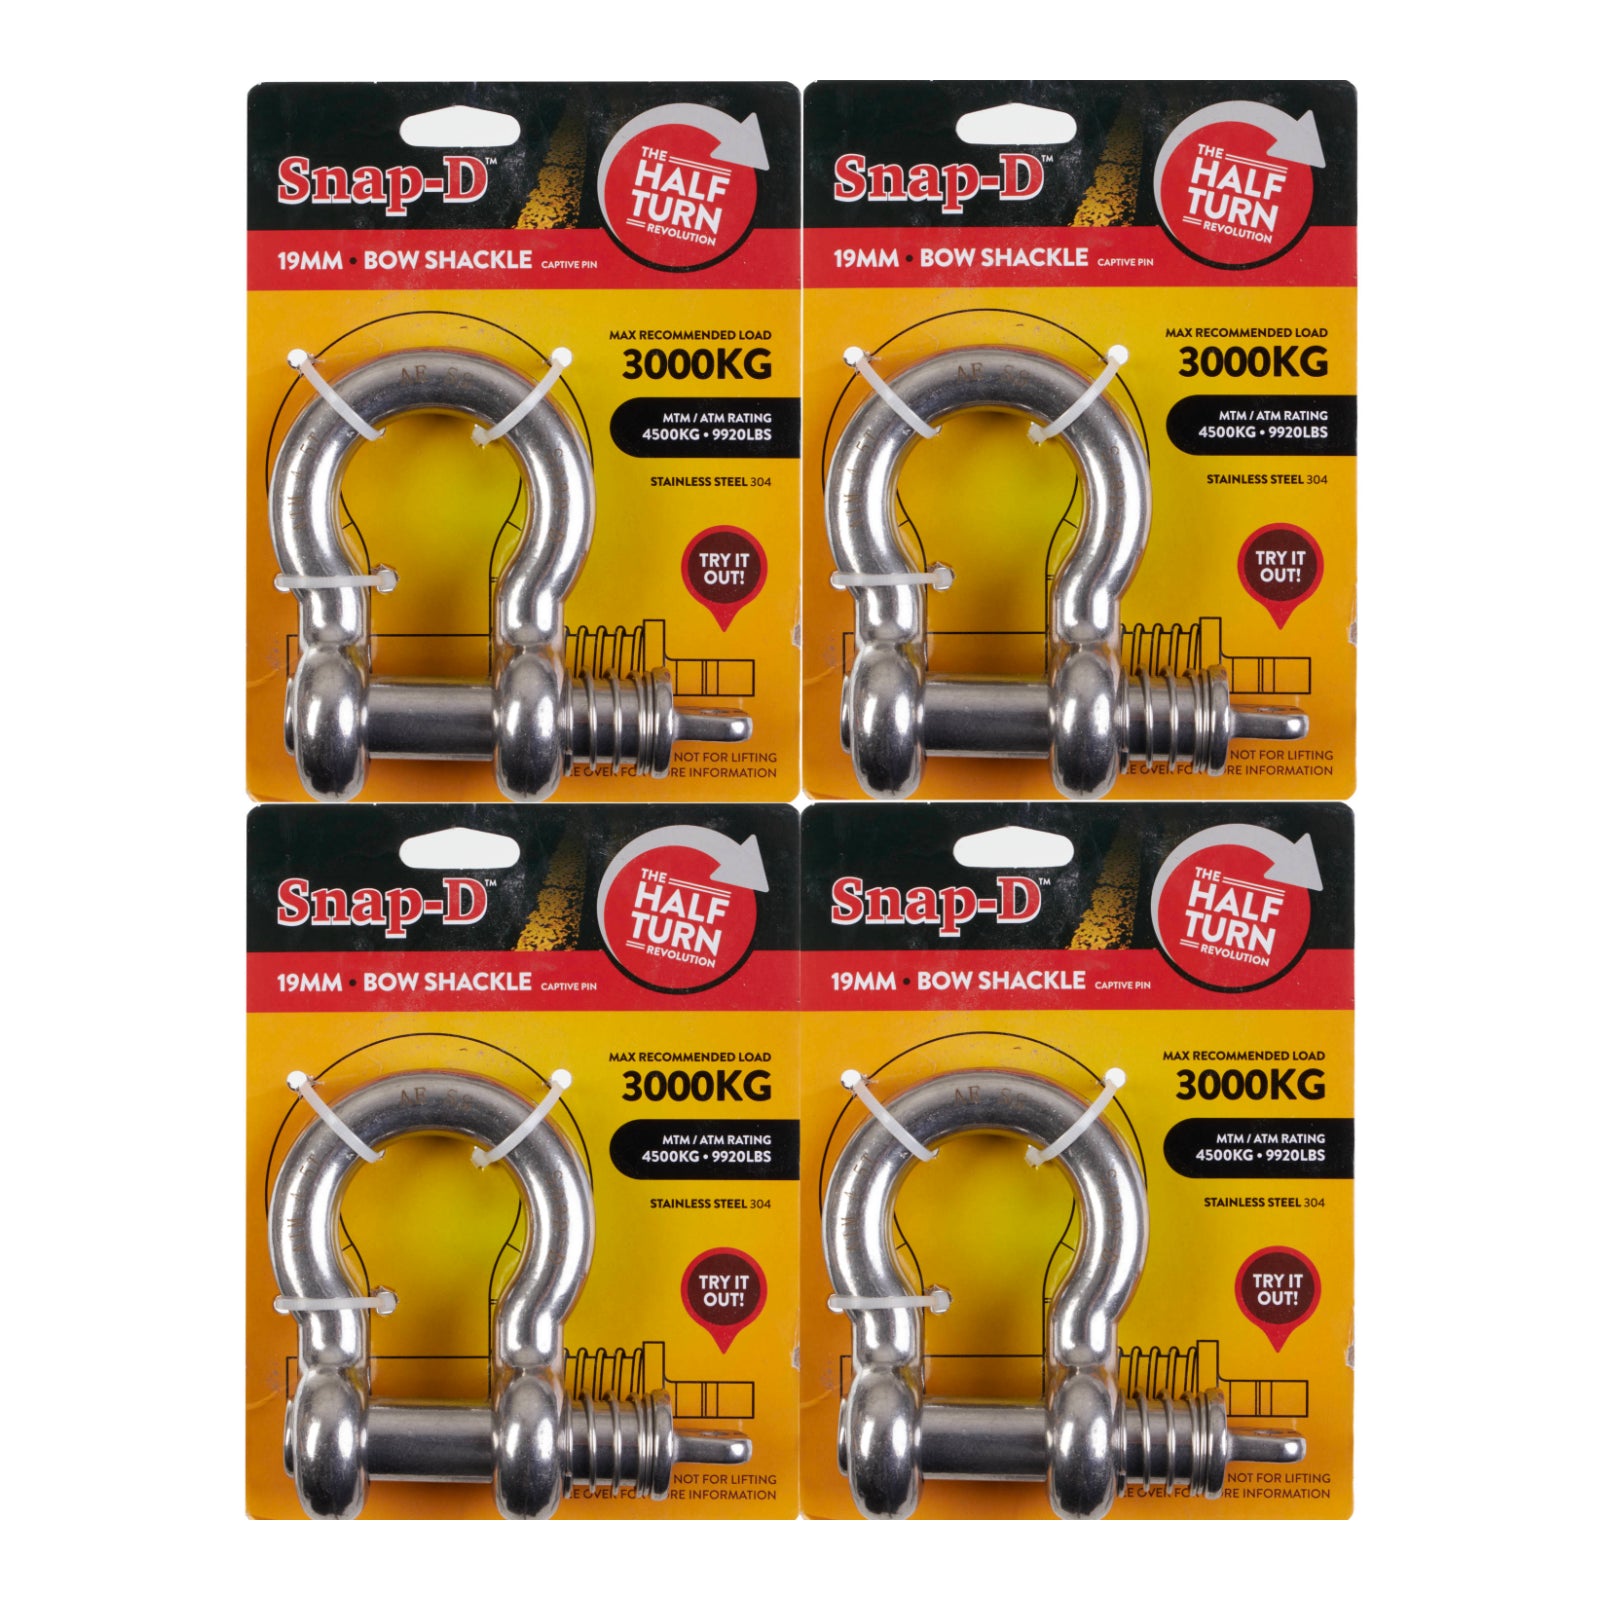 New SNAP-D 19mm Bow Shackle - 4 Pack Special #SD19BSS4PK